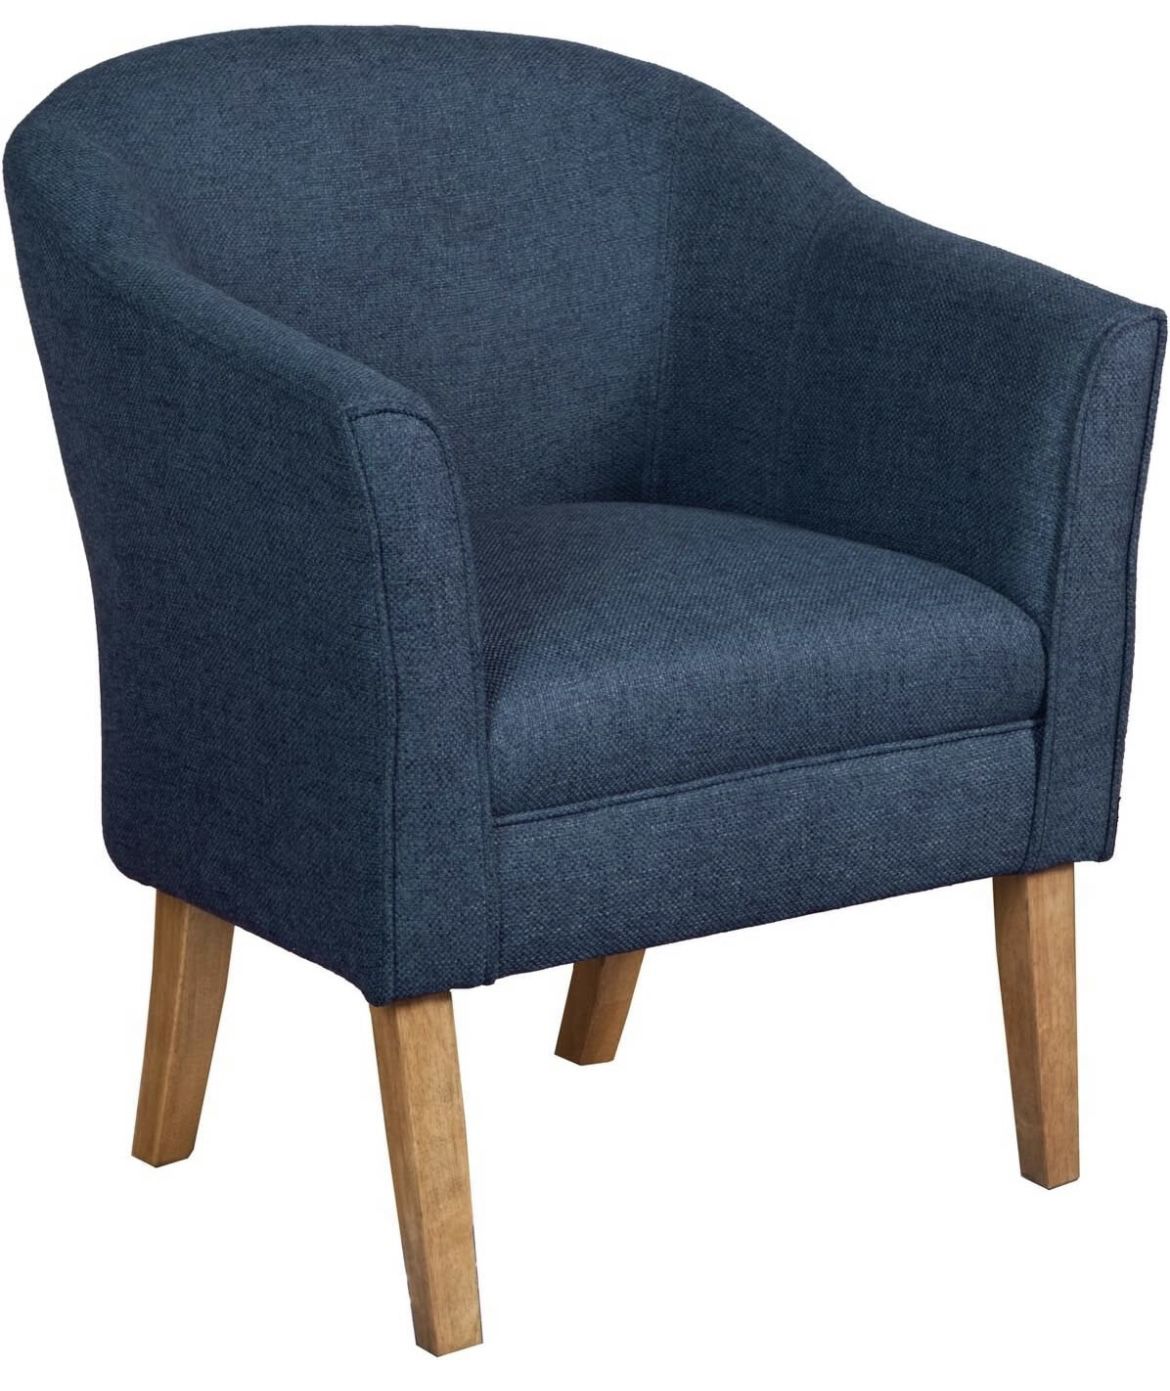 26-145 HomePop Barrel Shaped Accent Chair,Arm Rest, WOOD AND POLYESTER,Blue